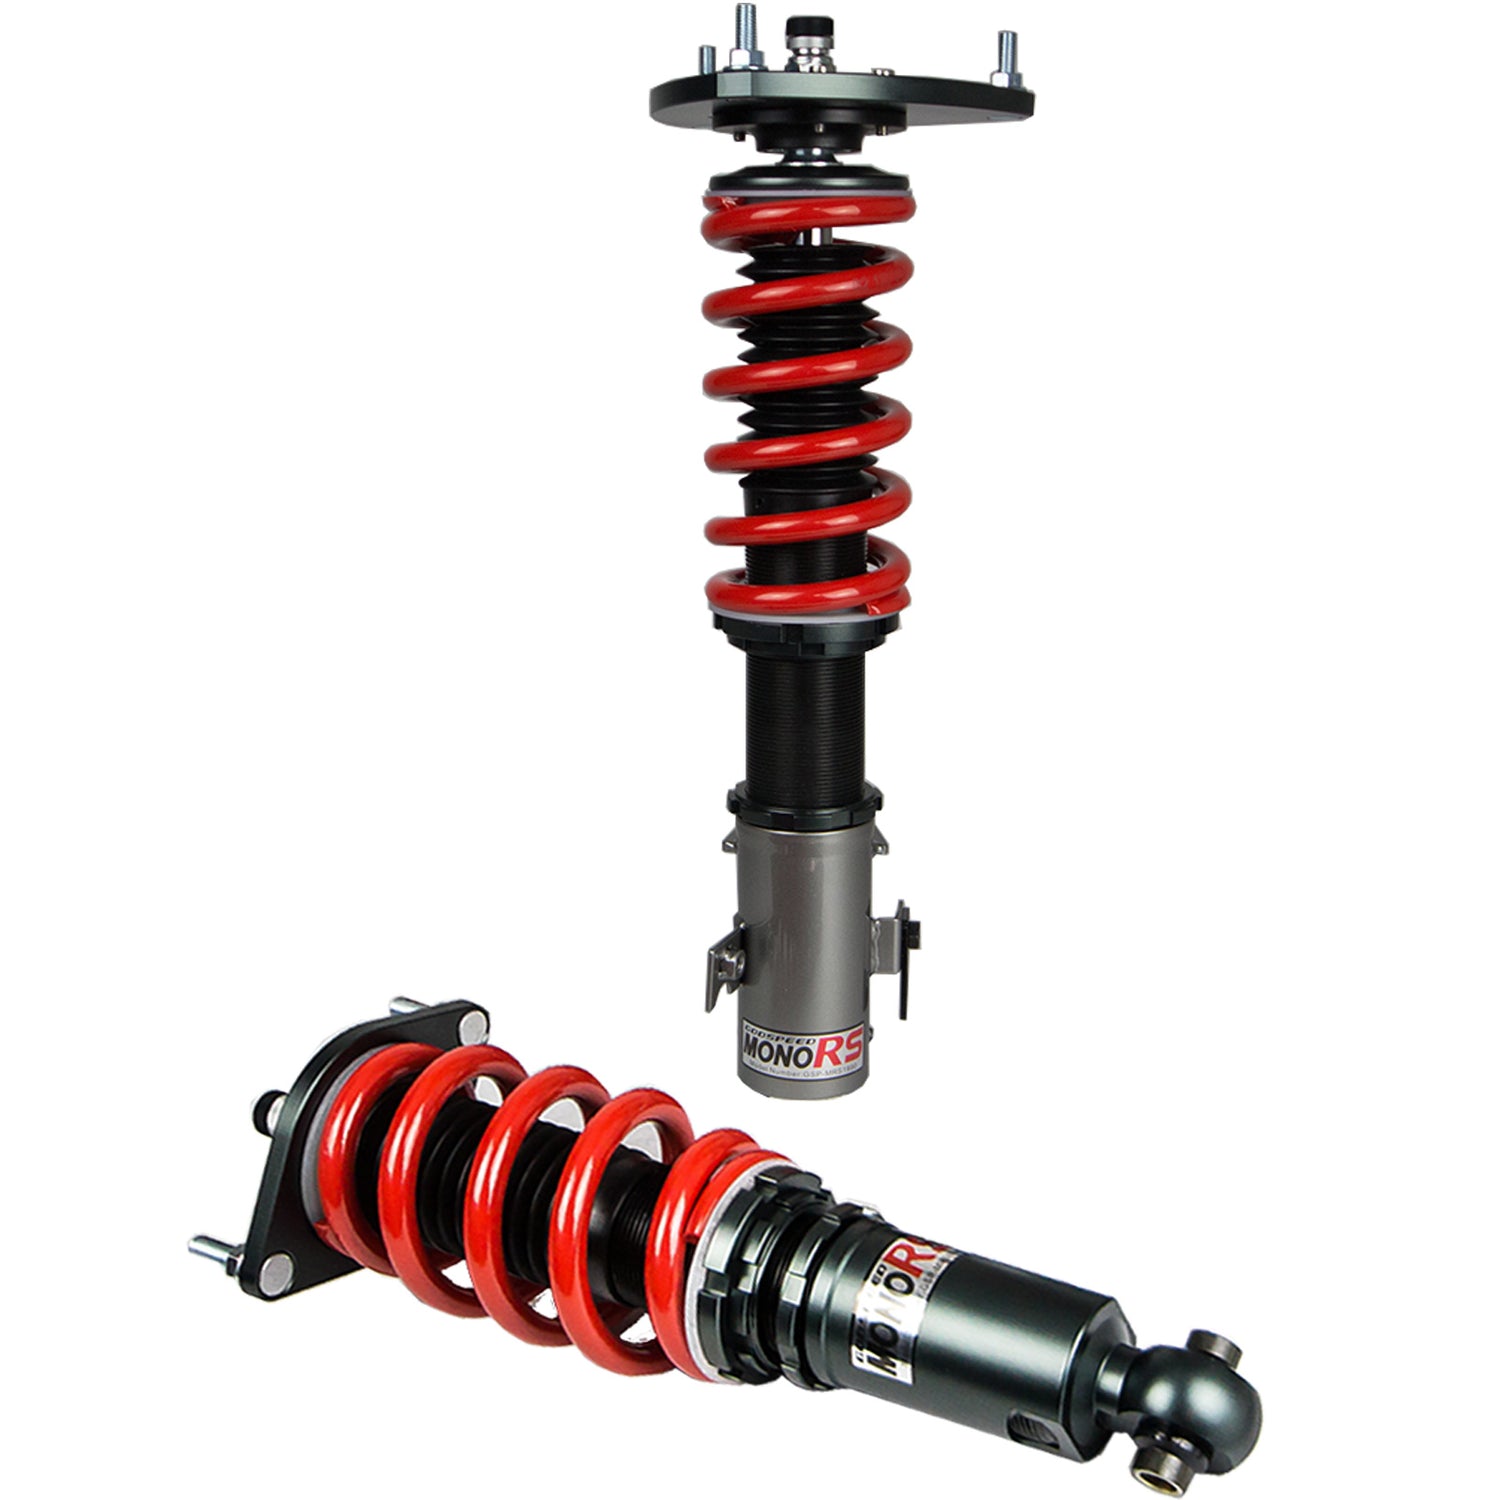 Godspeed MRS1990-B MonoRS Coilover Lowering Kit, 32 Damping Adjustment, Ride Height Adjustable